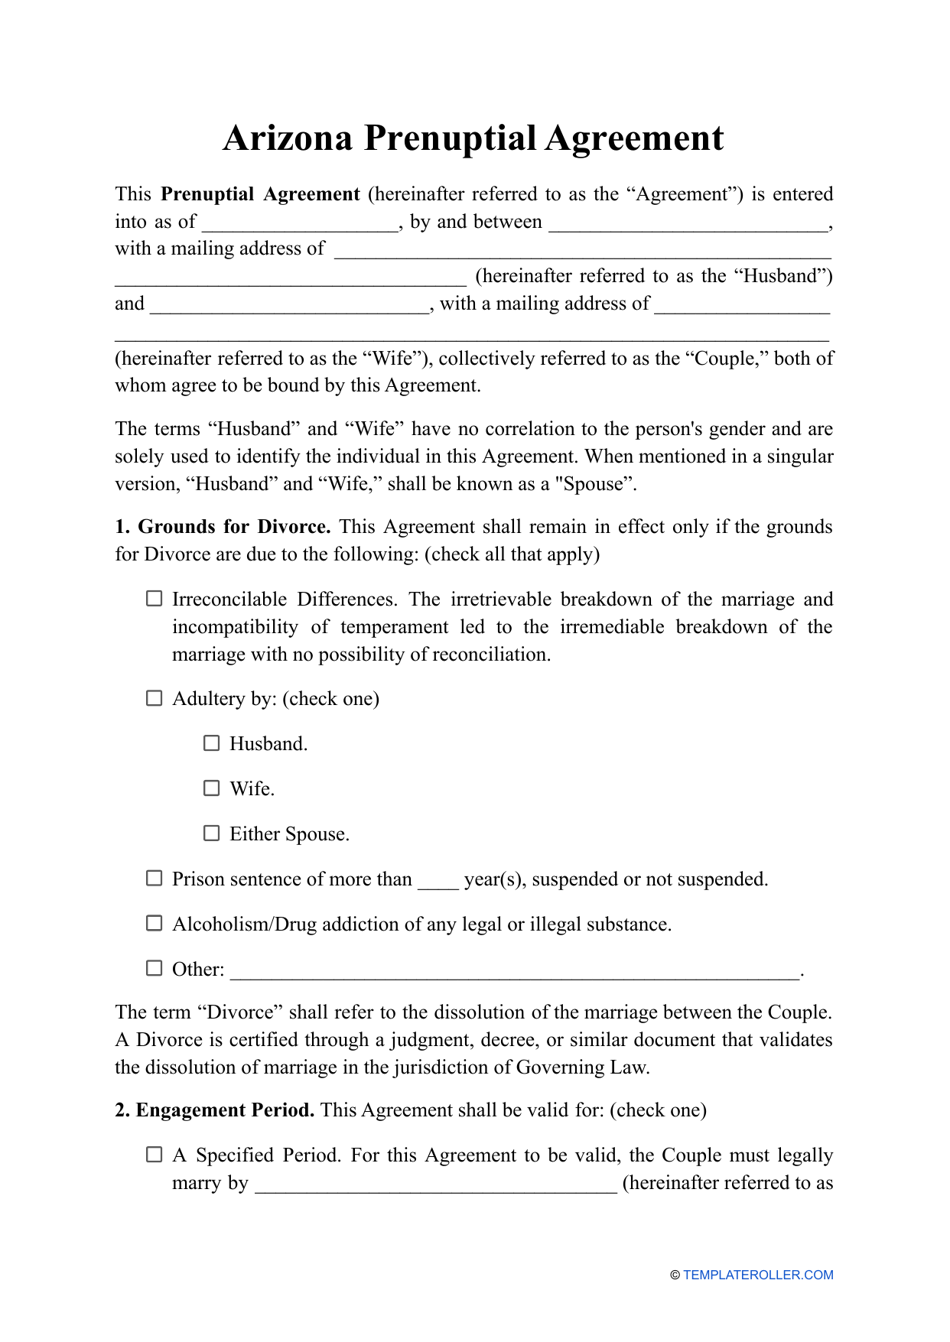 arizona-prenuptial-agreement-template-fill-out-sign-online-and